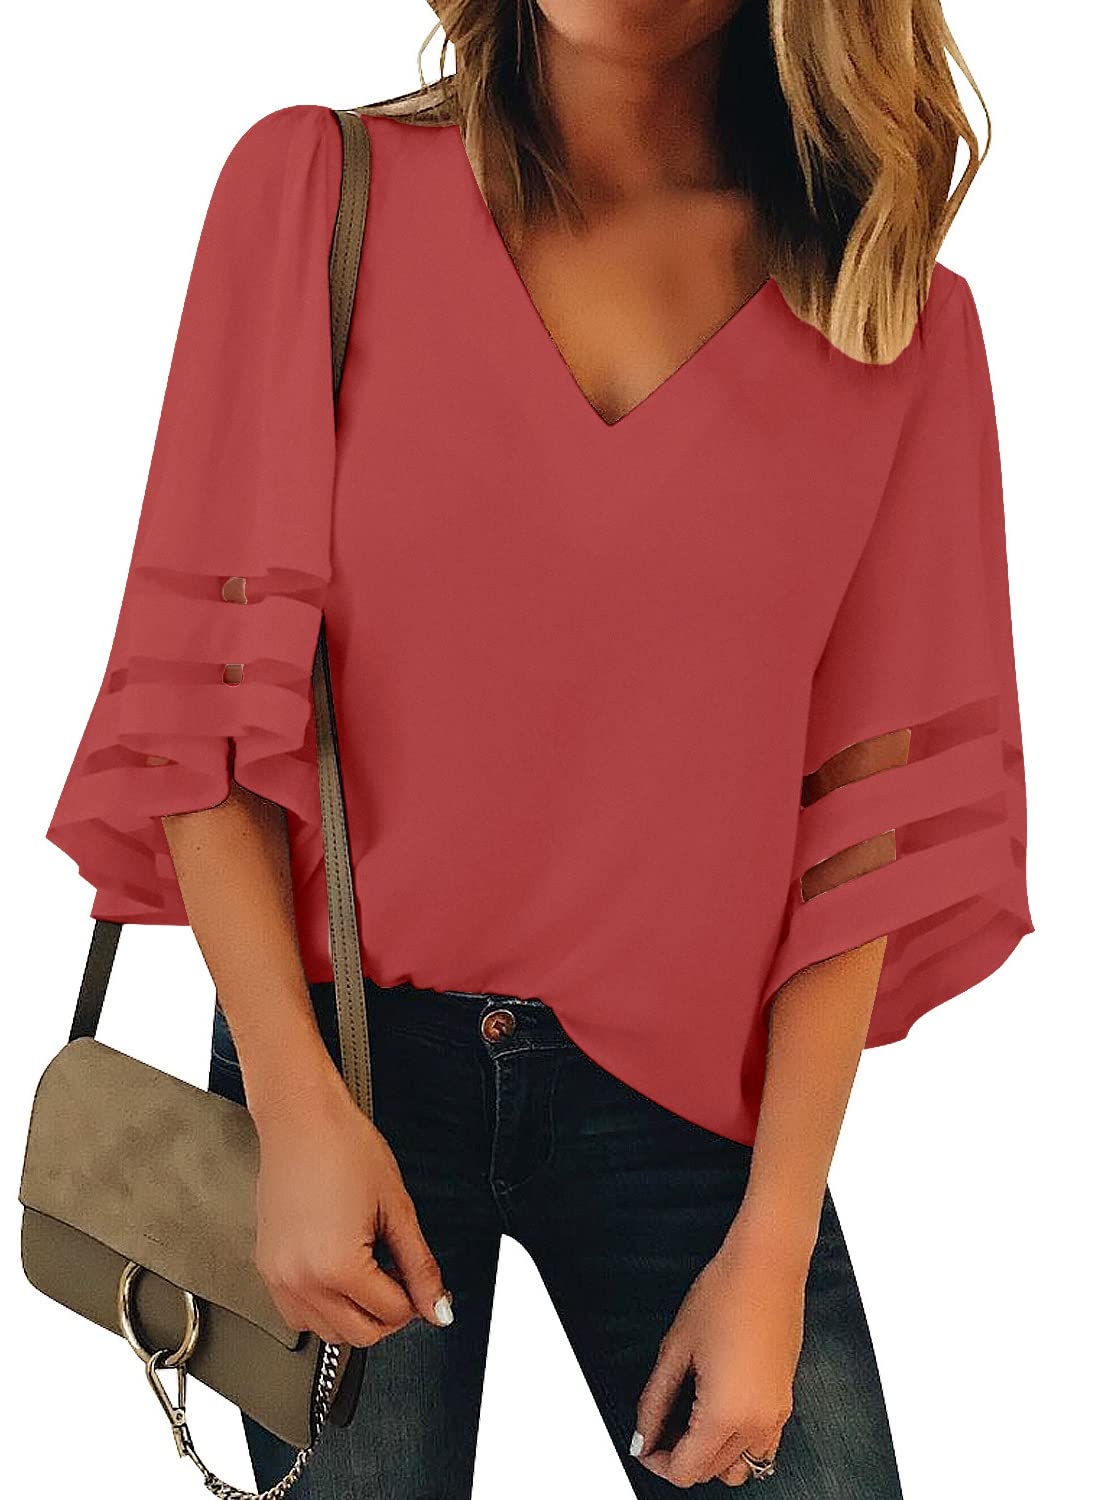 women's blouses from Sears.com